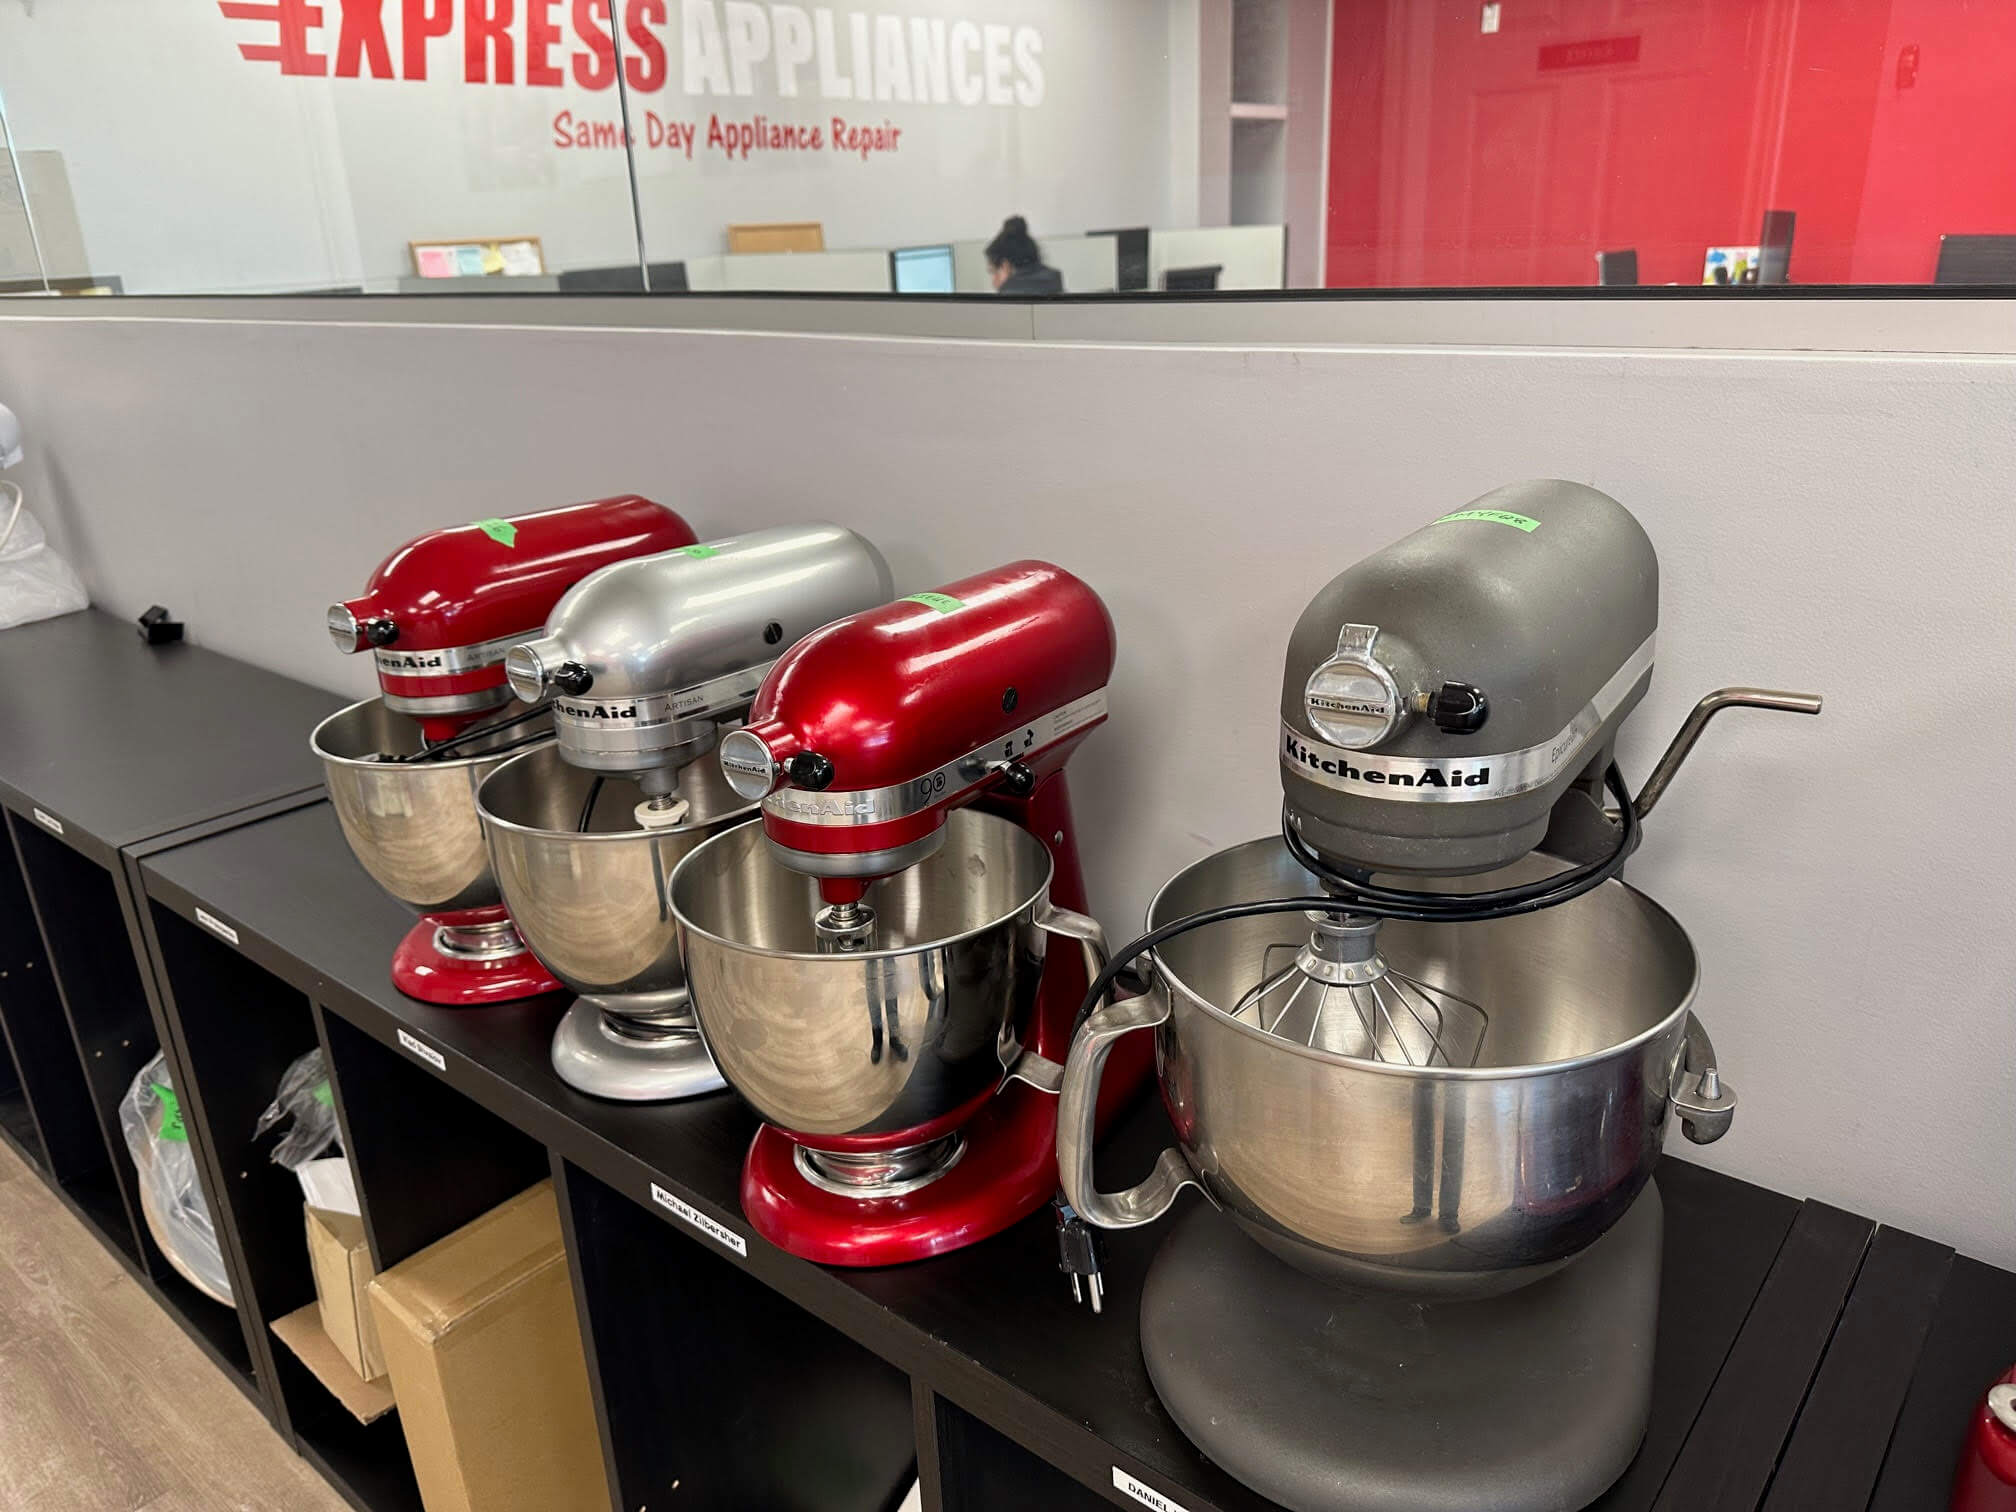 express appliances variety options